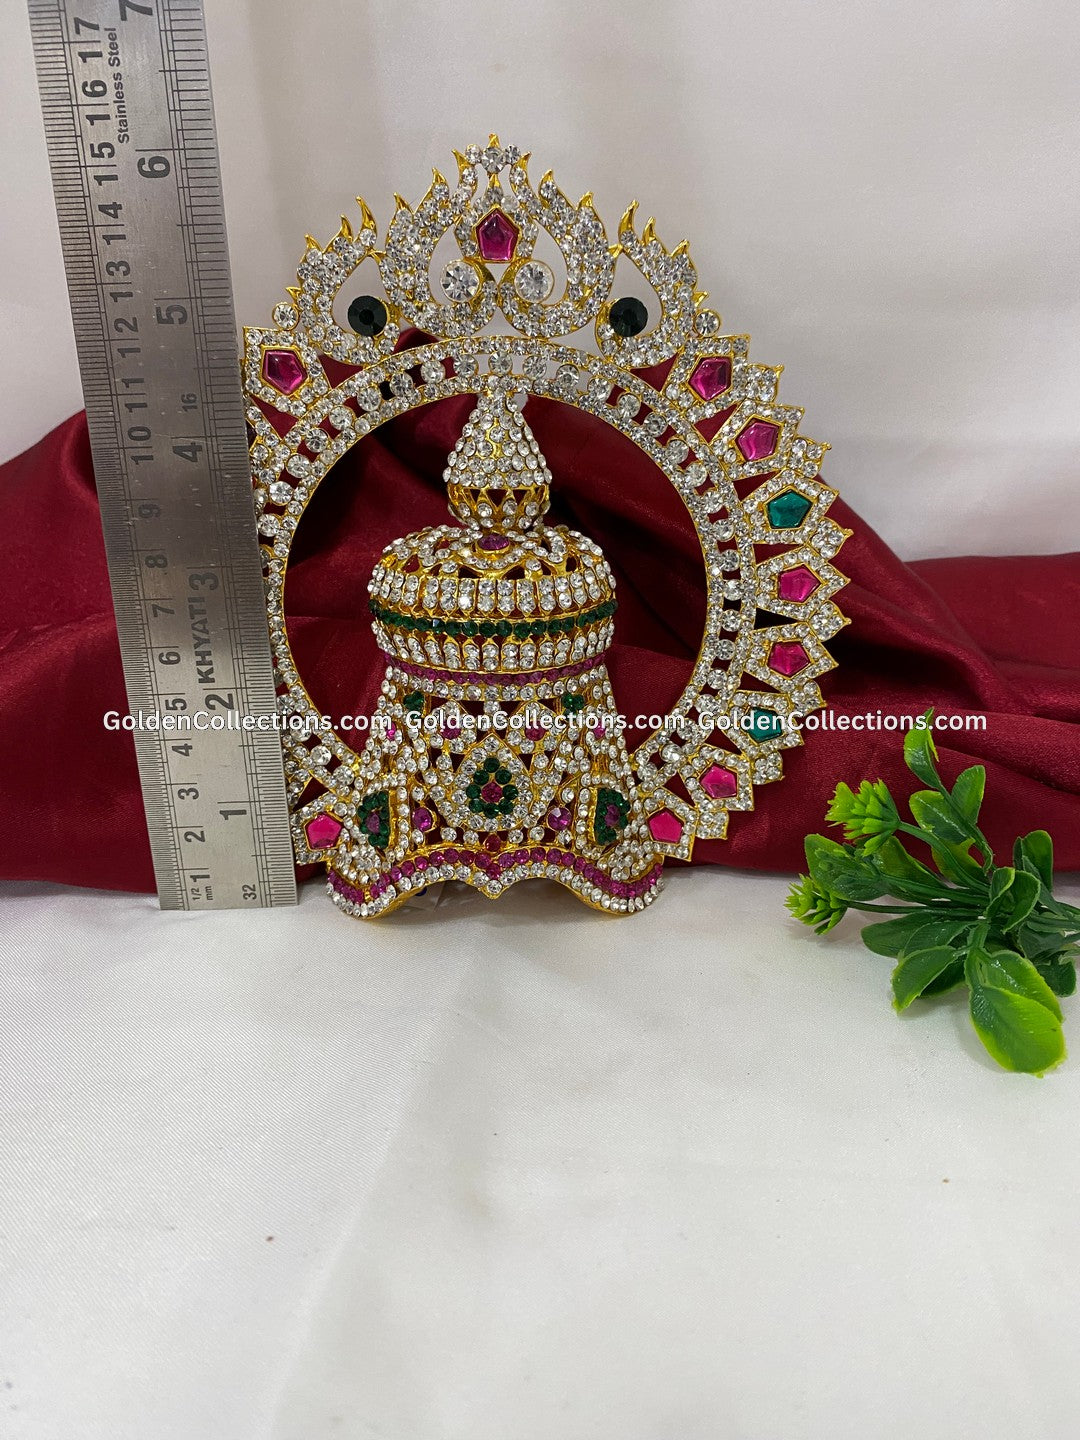 Exquisite Mukut for Deity Goddess Idol - GoldenCollections DGC-145 2